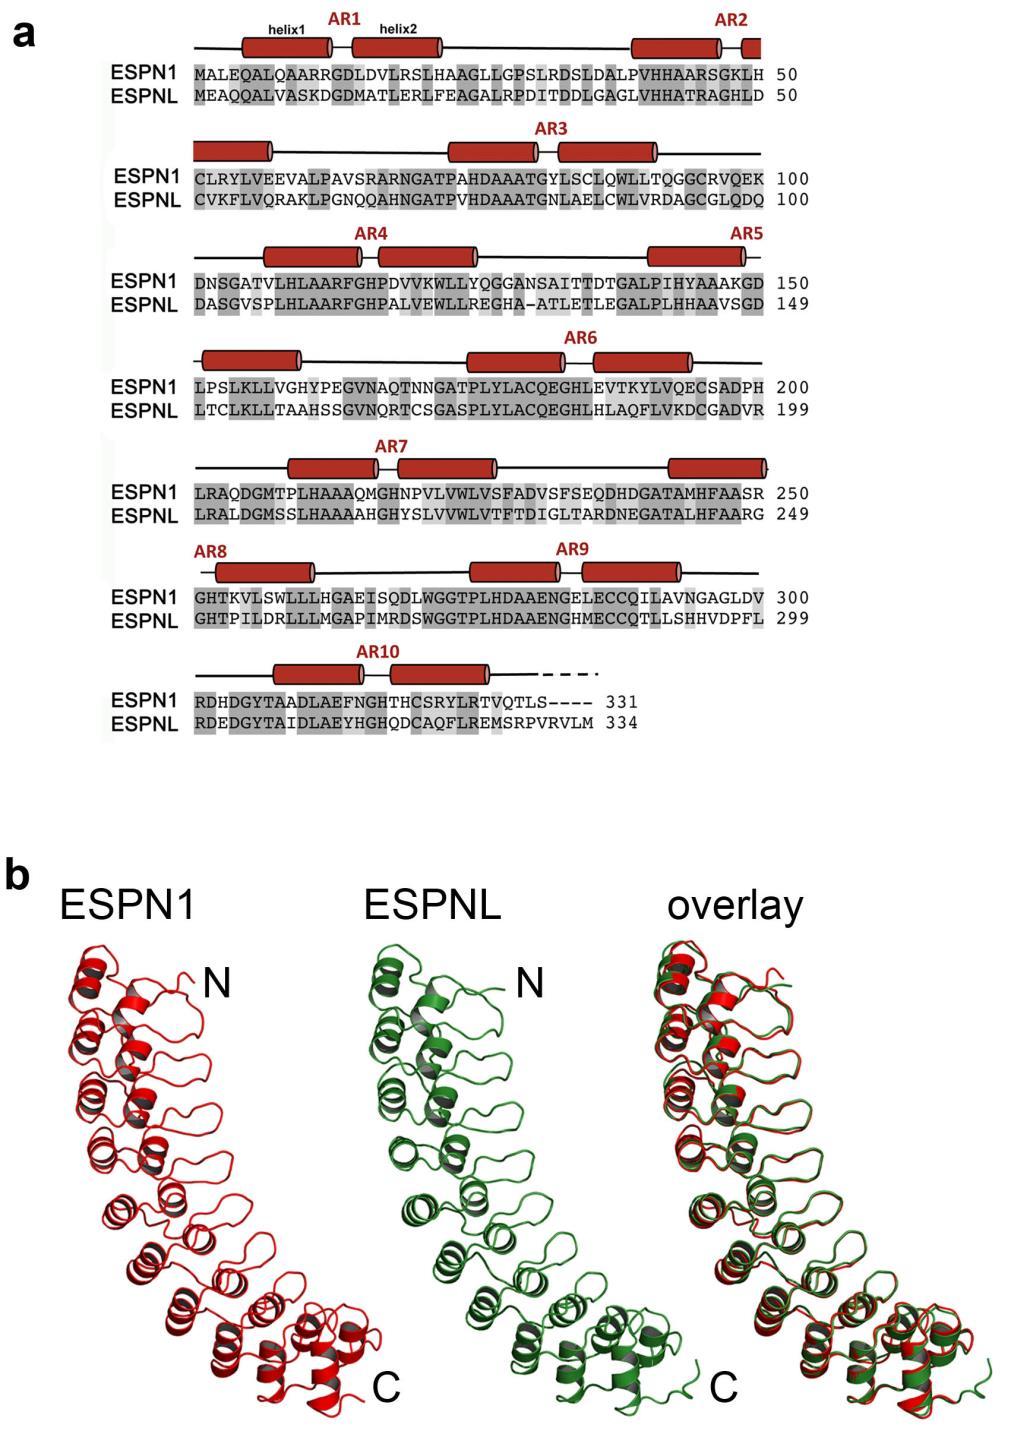 Supplementary Figure 11. Structural similarities of ESPN-1 and ESPNL ankyrin-repeat domains.